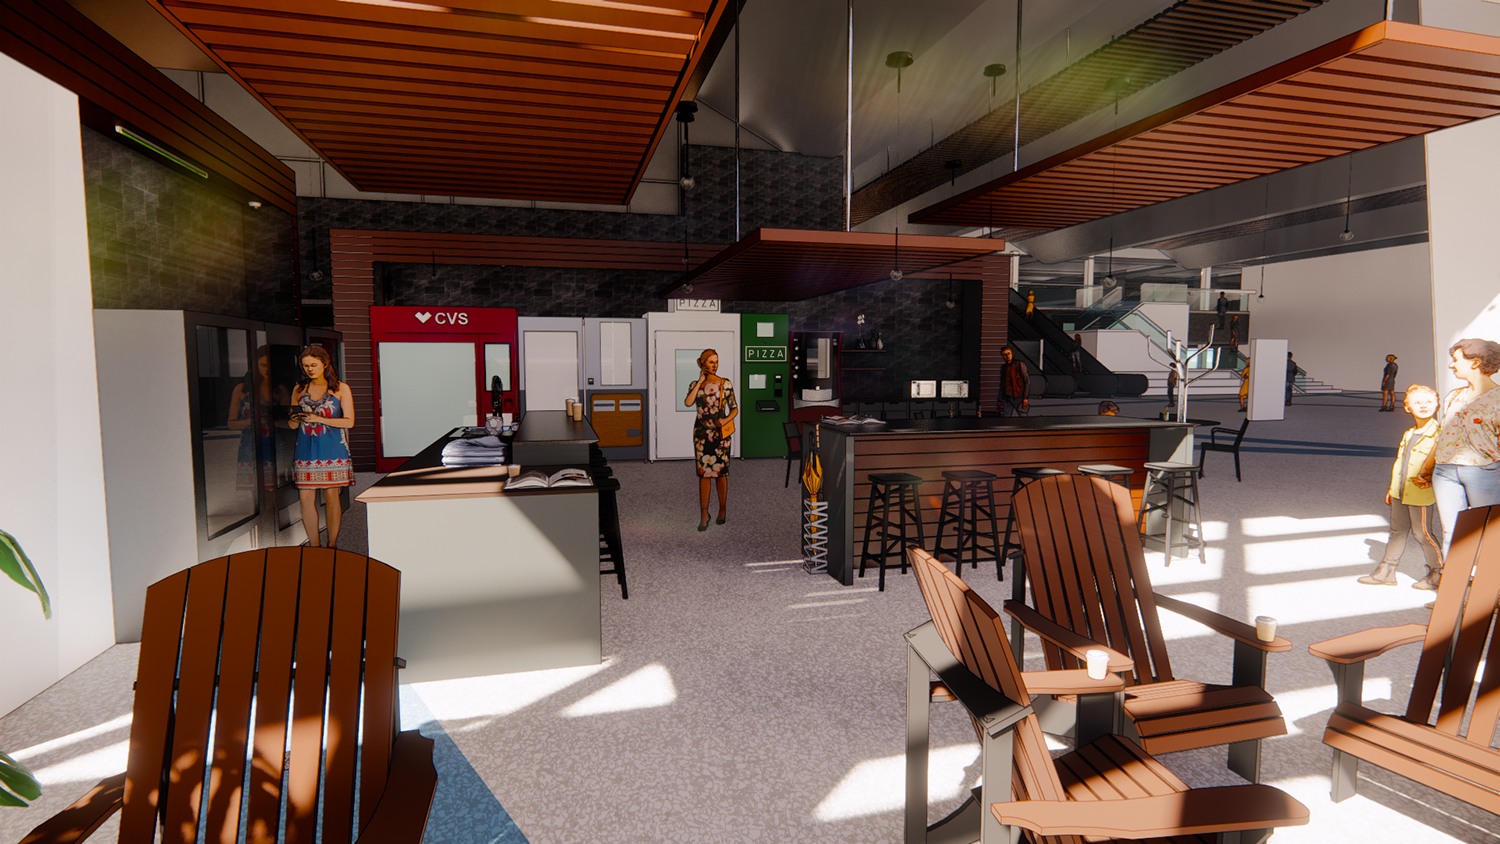 A rendering of a pre-security food and beverage space.